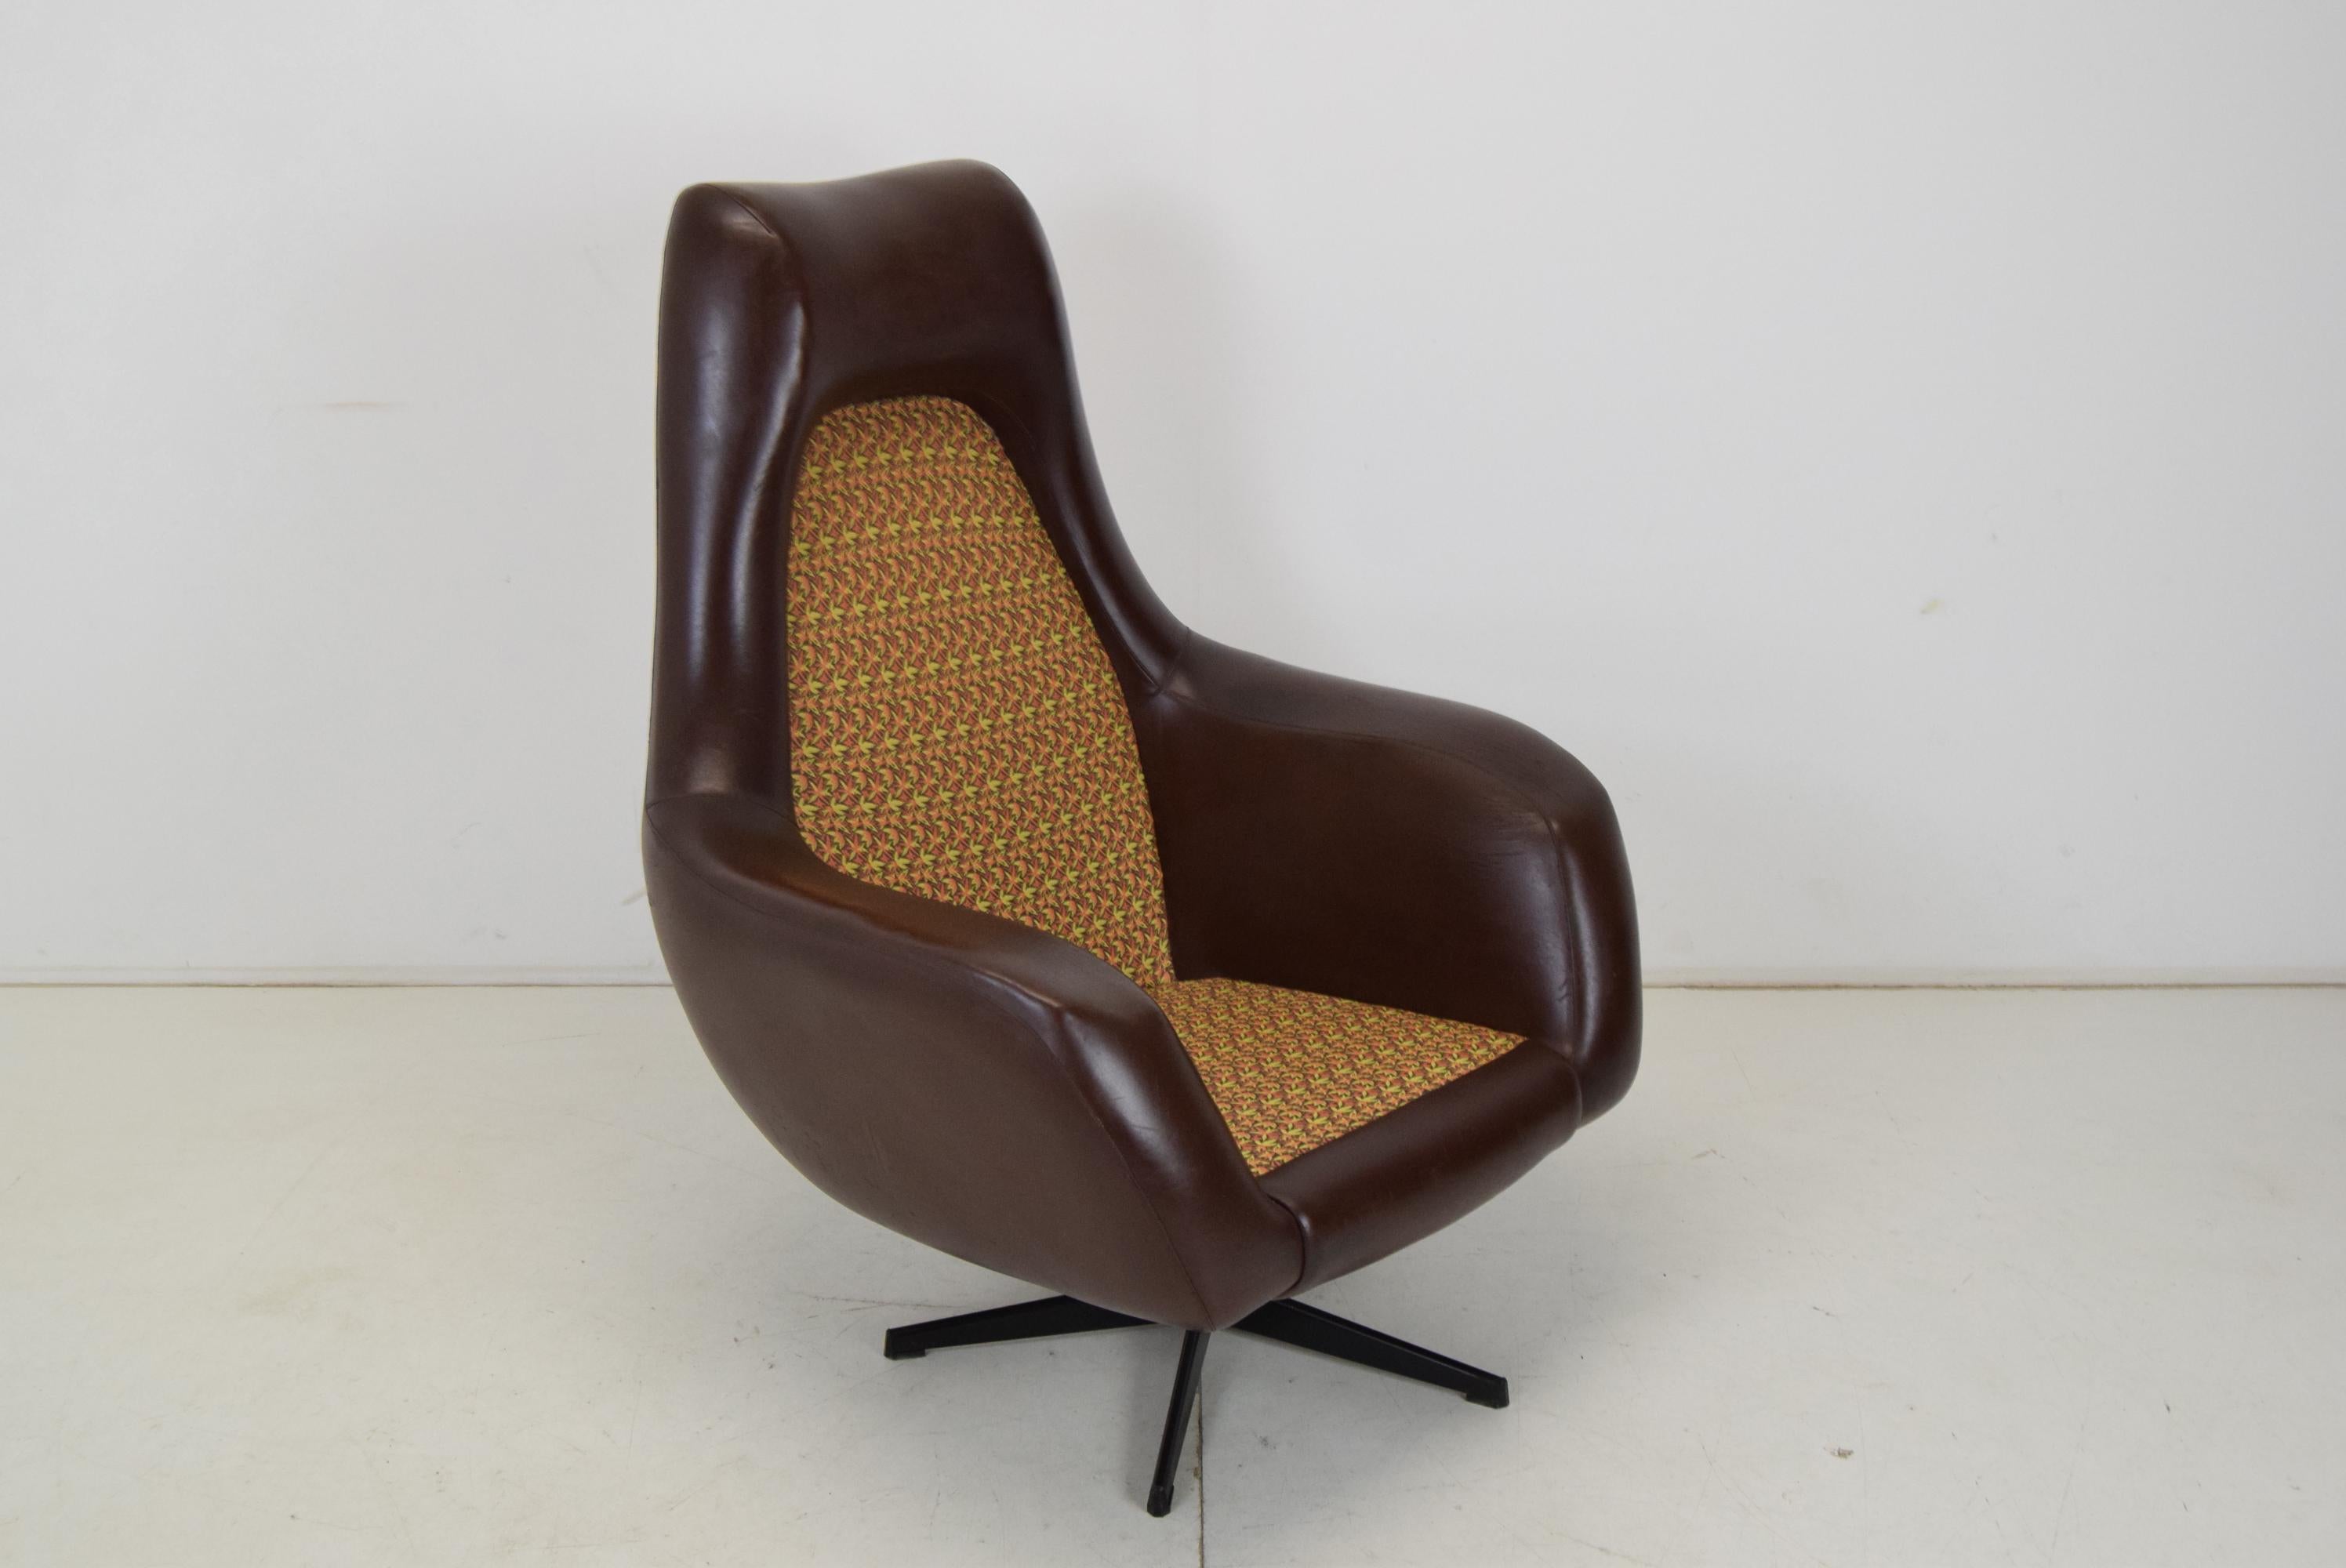 Made in Czechoslovakia.
Made of fabric, metal, Leatherette
The chair is missing cushions
Has signs of use.
Original condition.